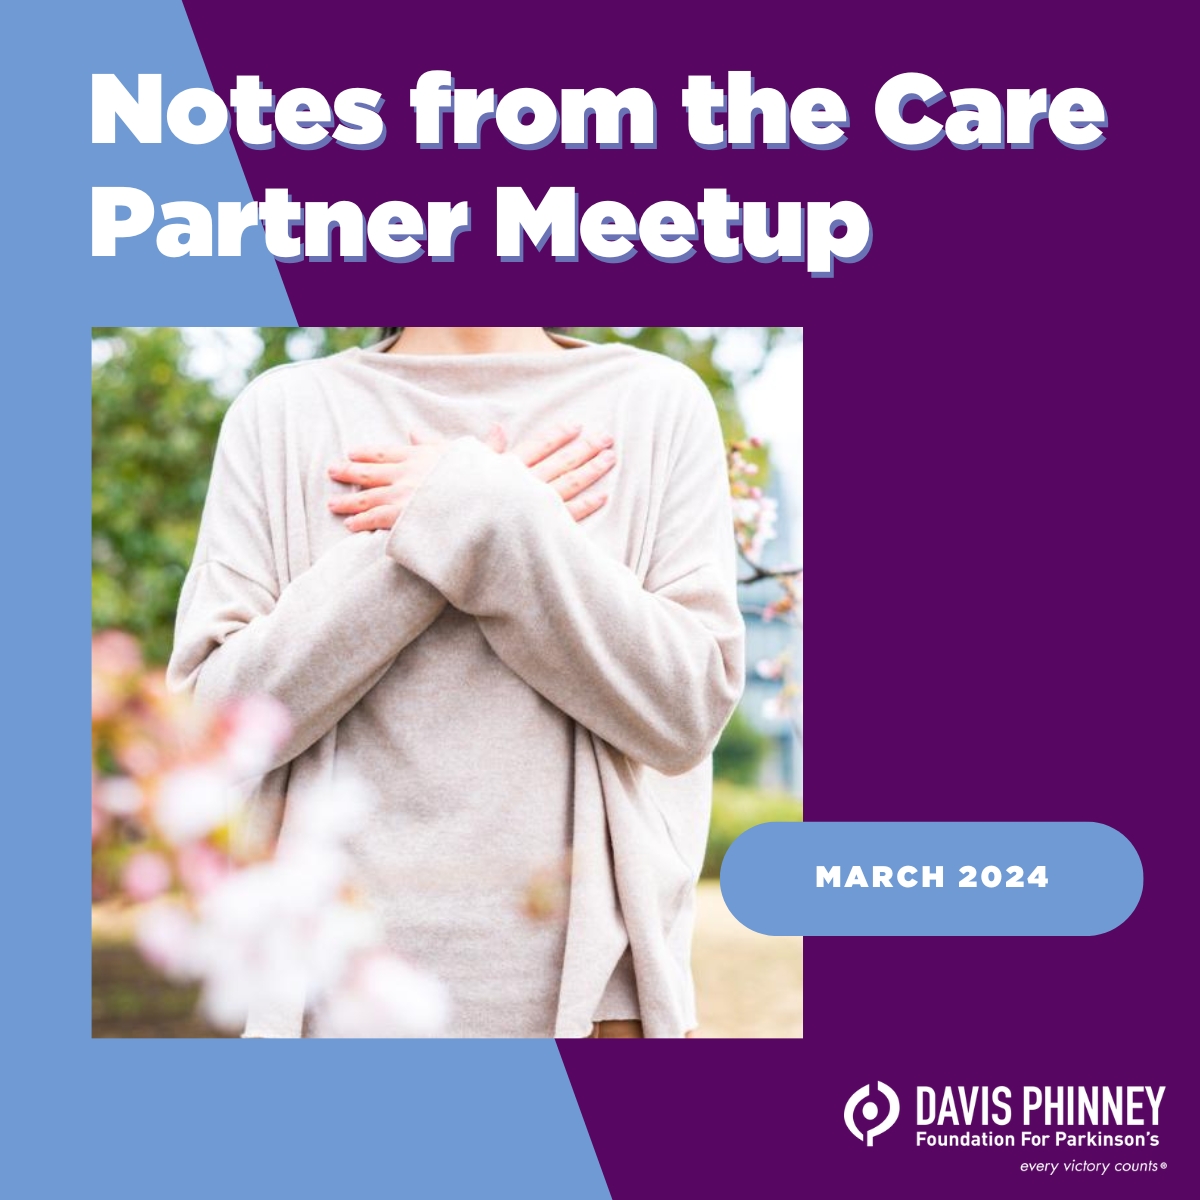 Along with our regular panel, our March 2024 #CarePartner Meetup featured Angela Robb and Gail Gitin. This session was dedicated to answering #questions from our viewers/listeners. Read the #meetup notes here: bit.ly/3VO2ViJ